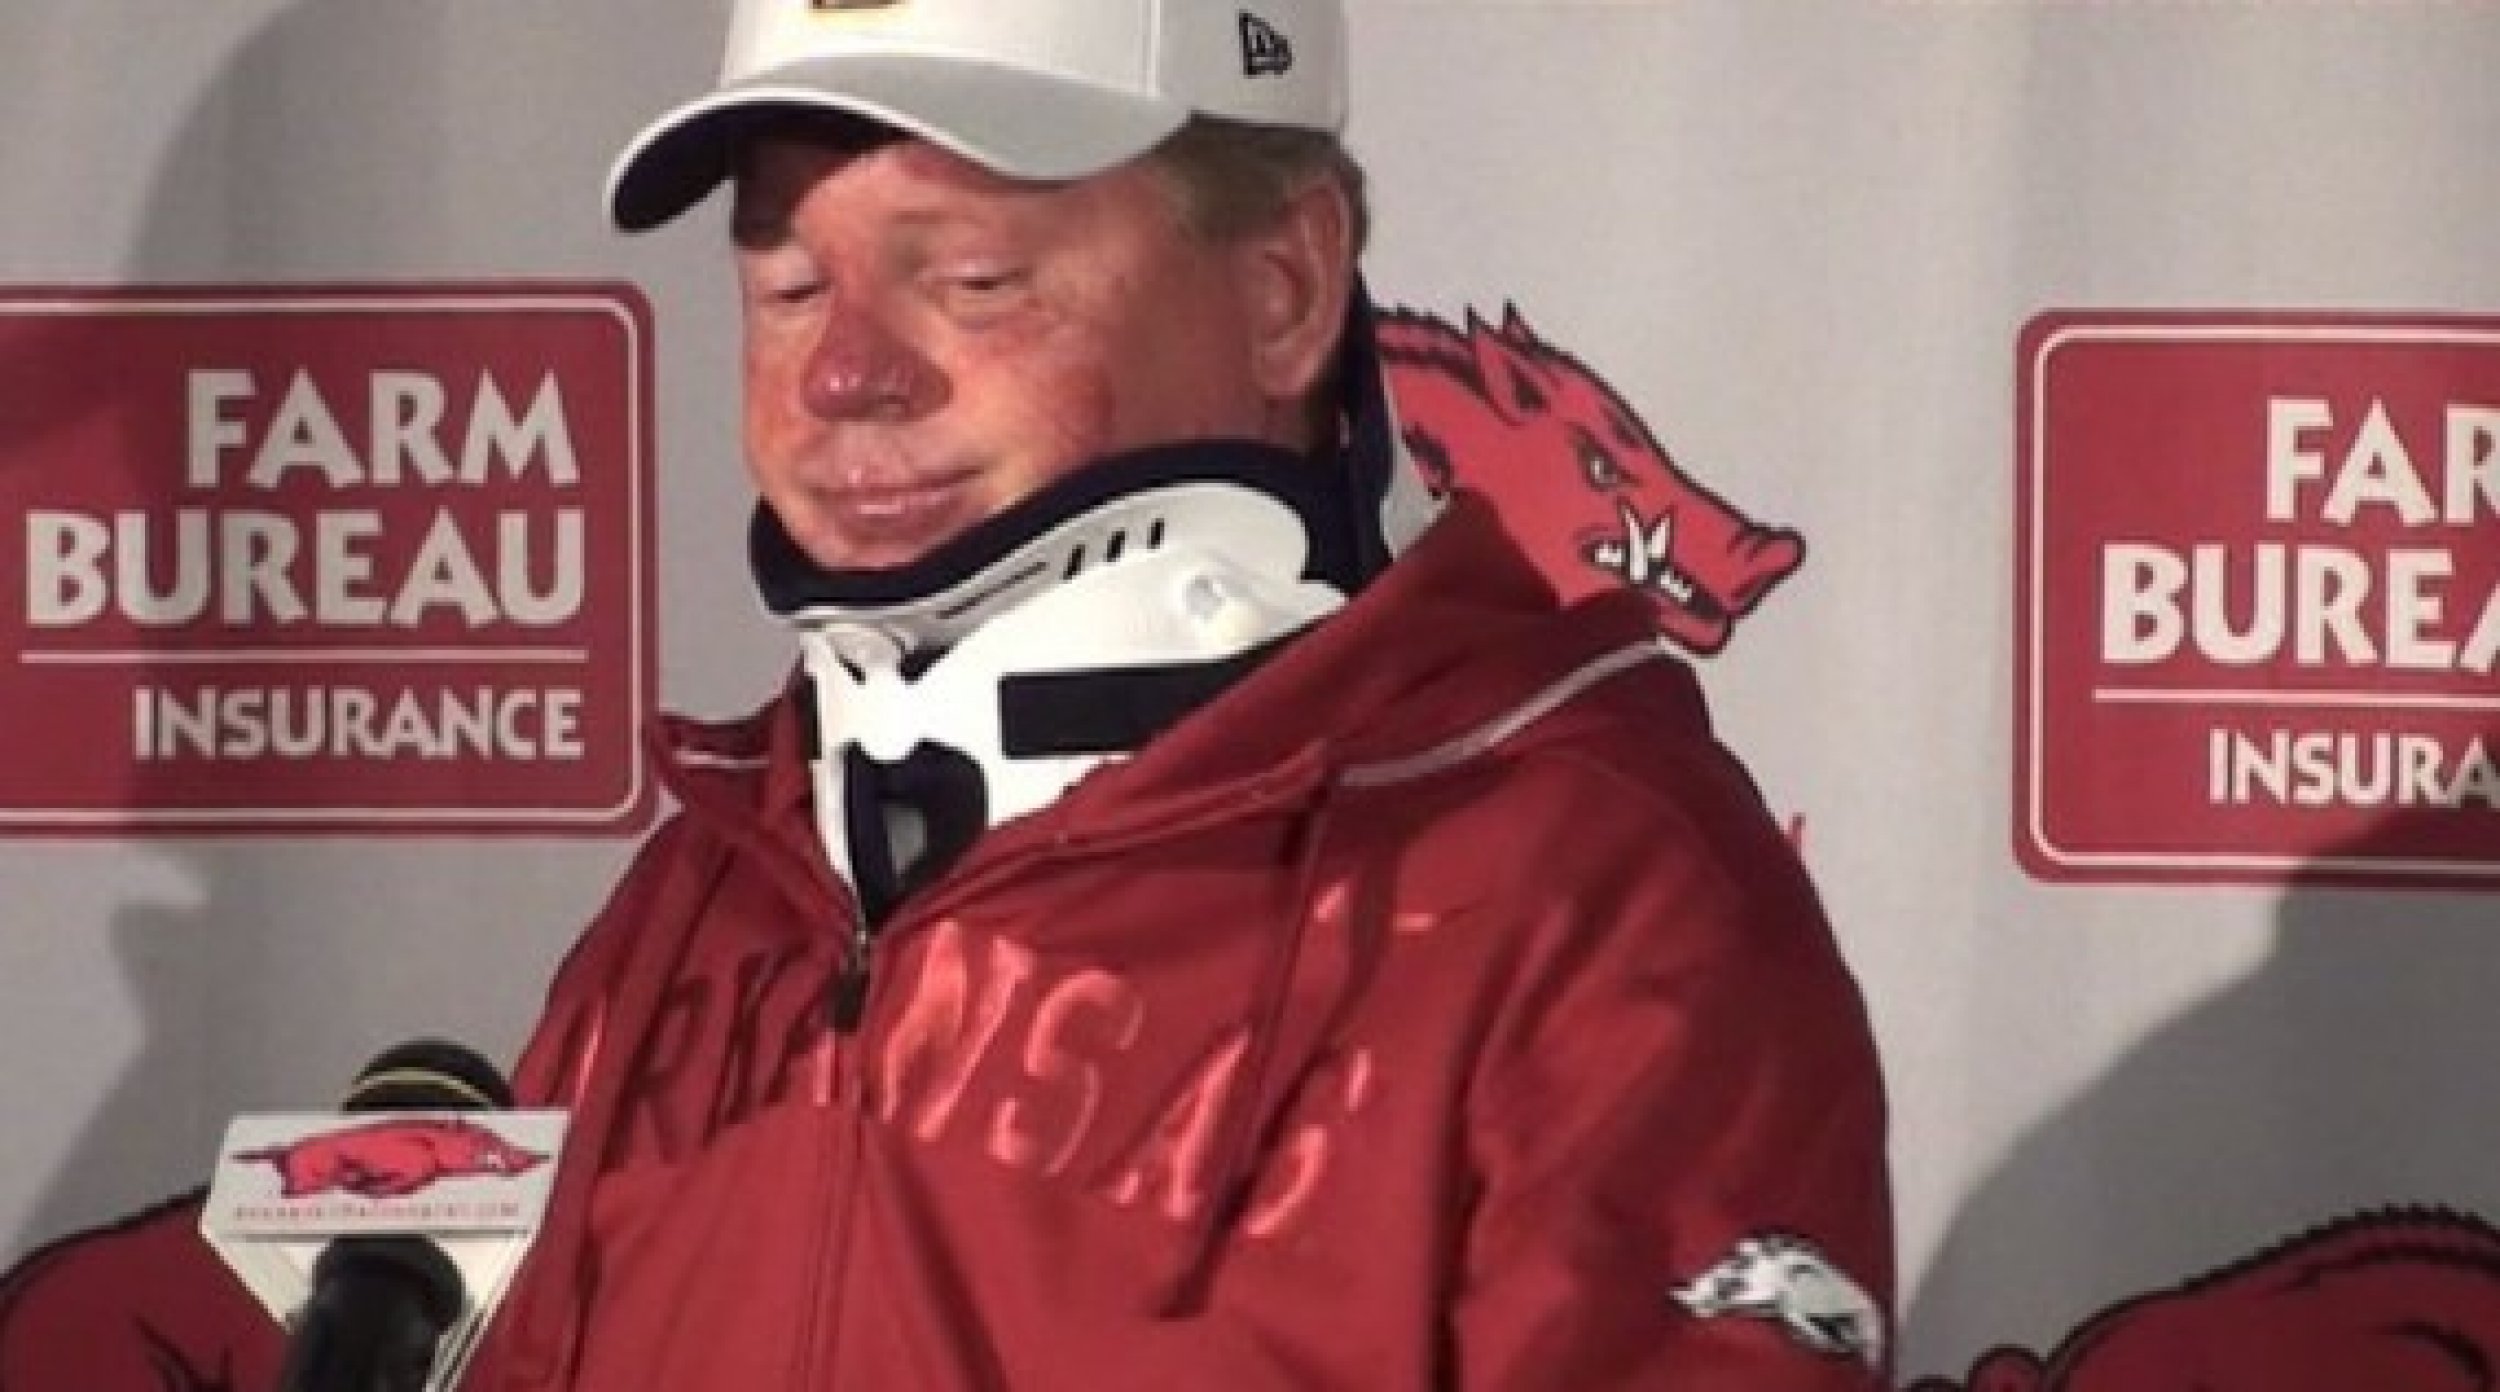 Petrino was injured in the crash, fracturing a vertebrae and breaking several ribs.